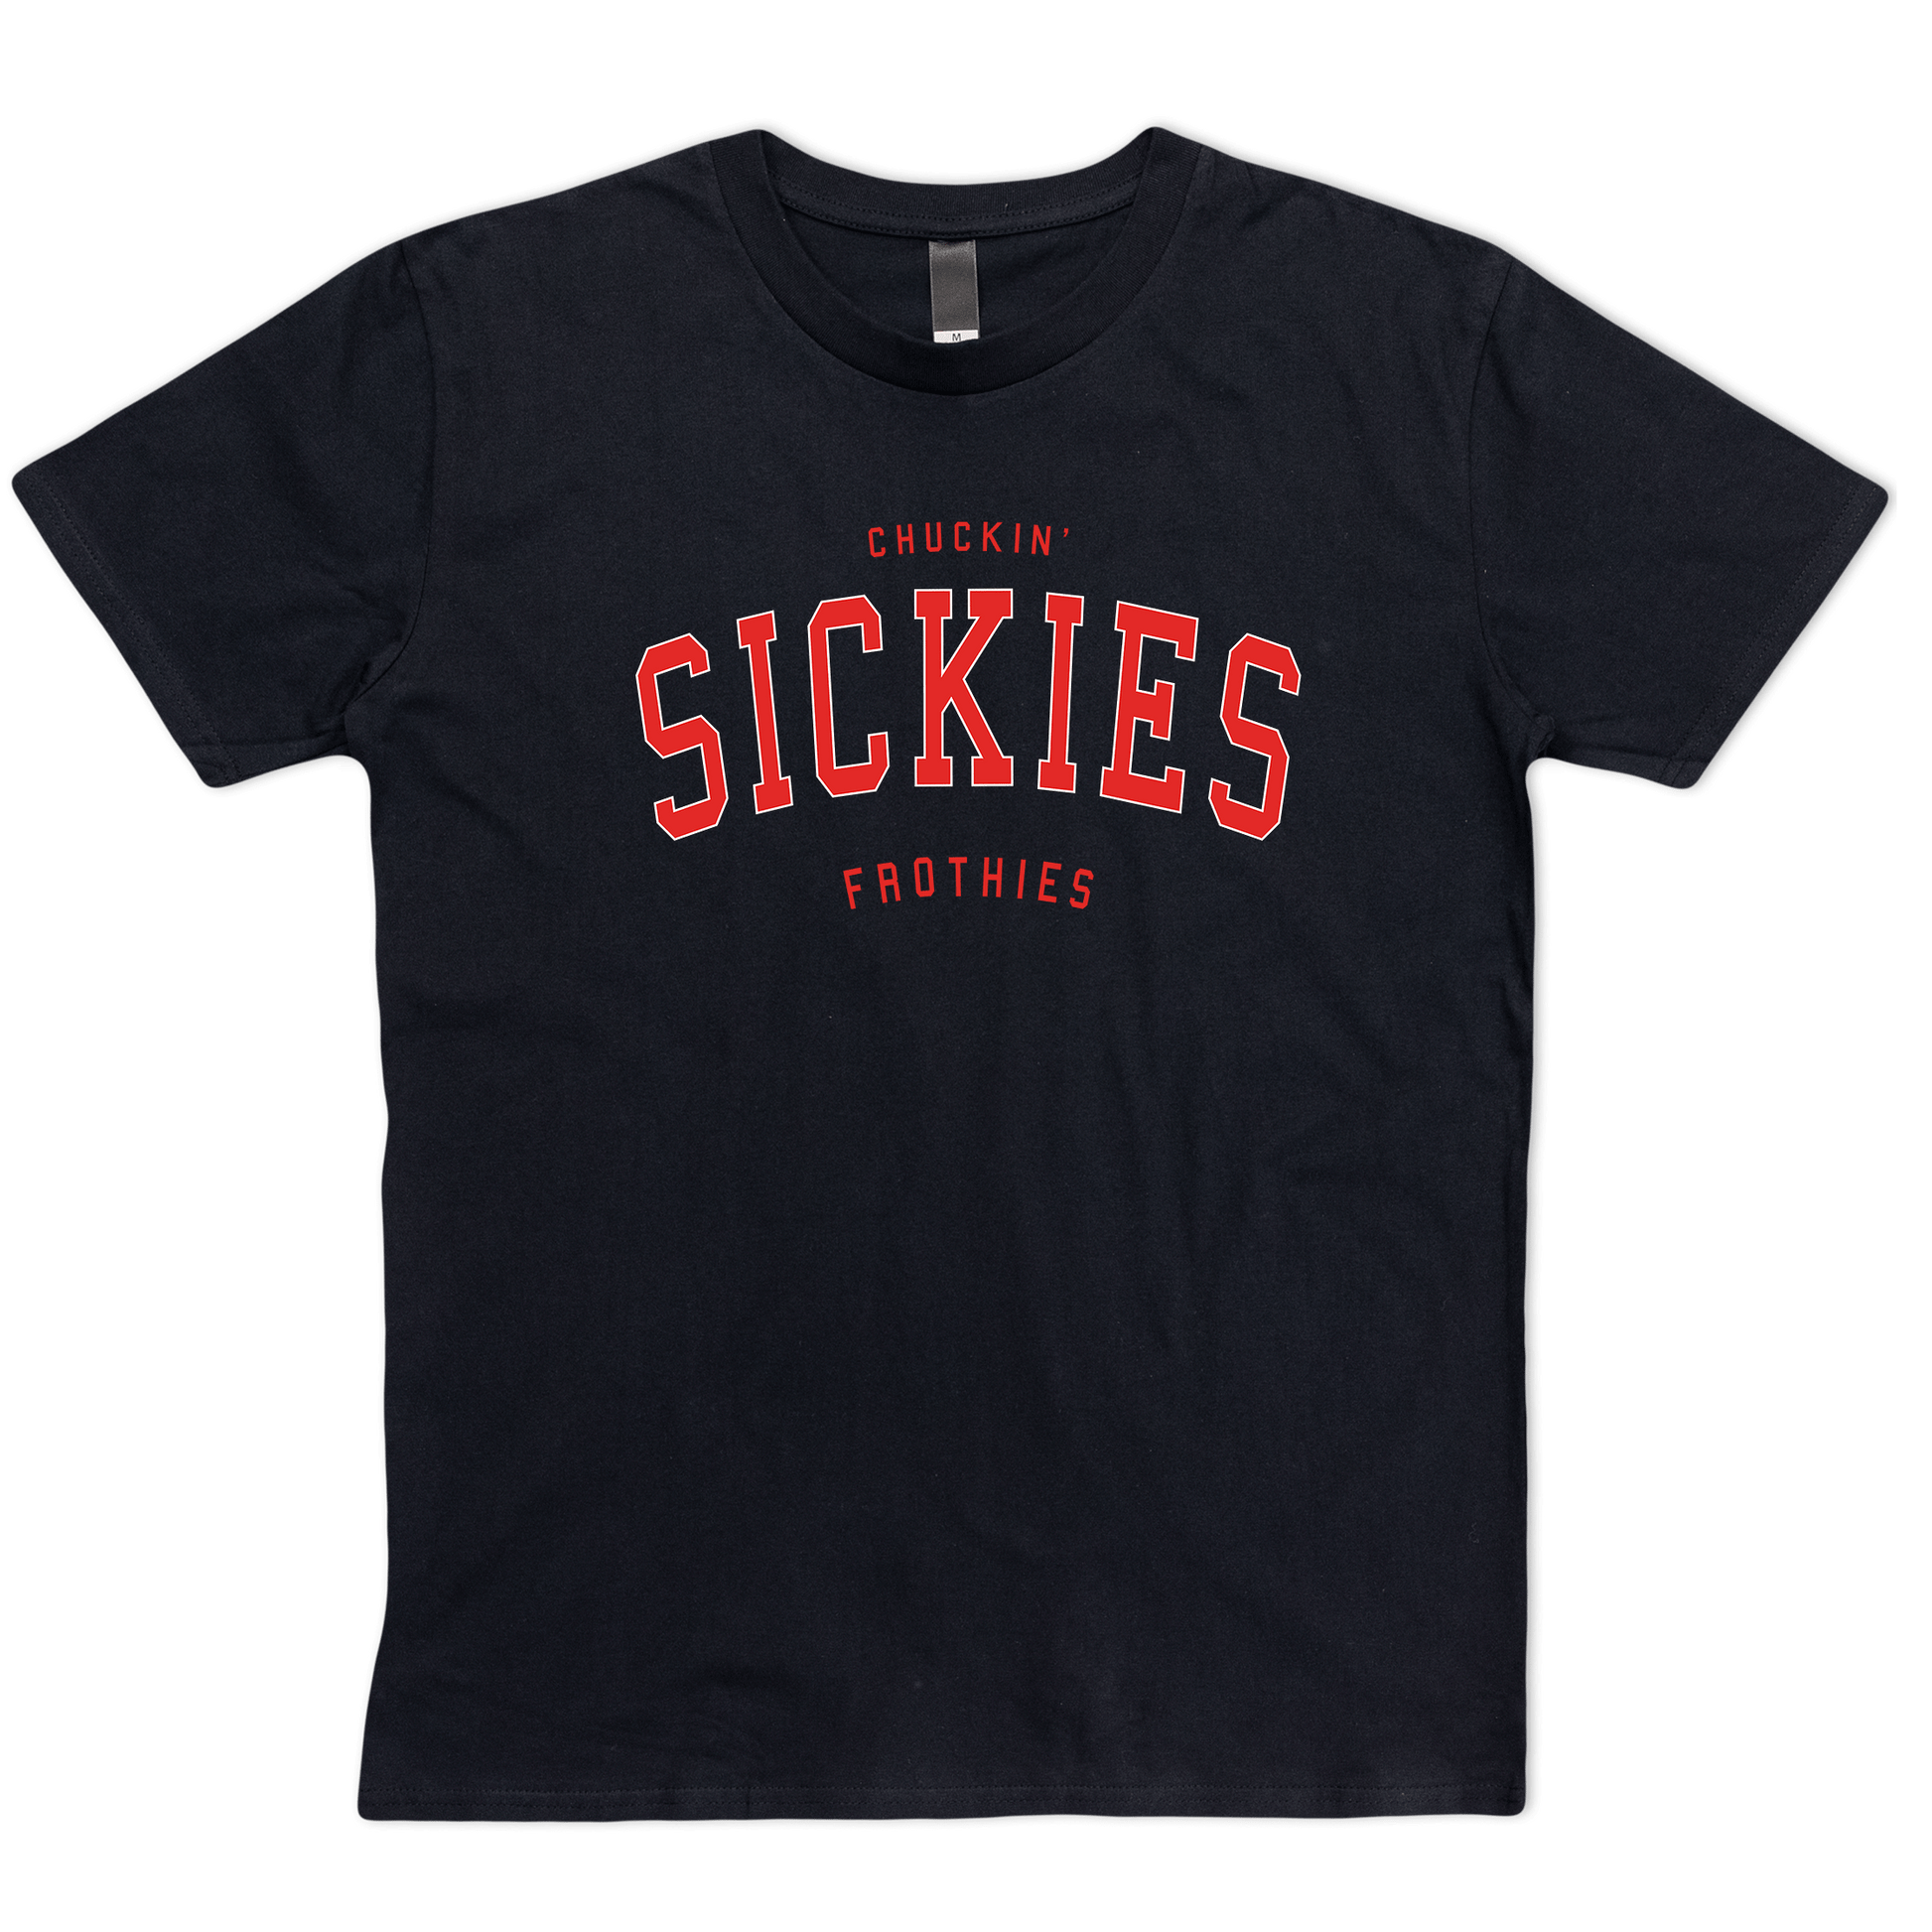 Sickies Tee Red Clothing Frothies